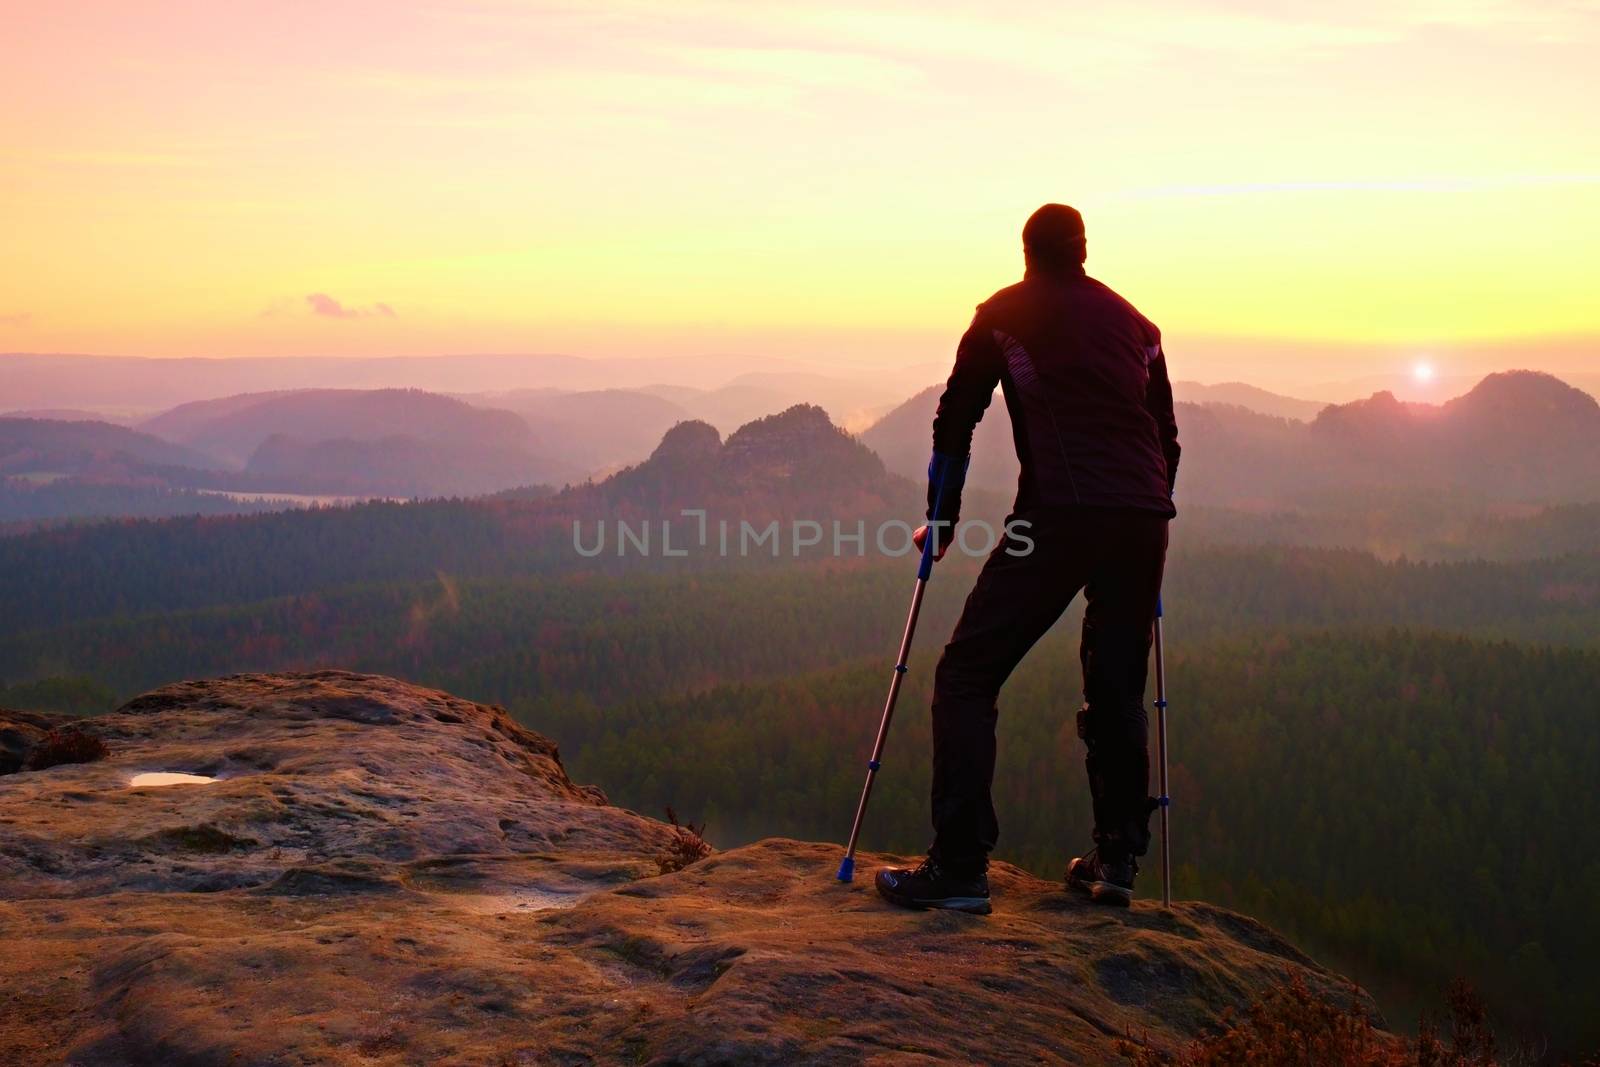 Hiker with broken leg in immobilizer. Tourist with  medicine crutch on mountain peak. Deep misty valley bellow silhouette of man with hand in air. Spring daybreak